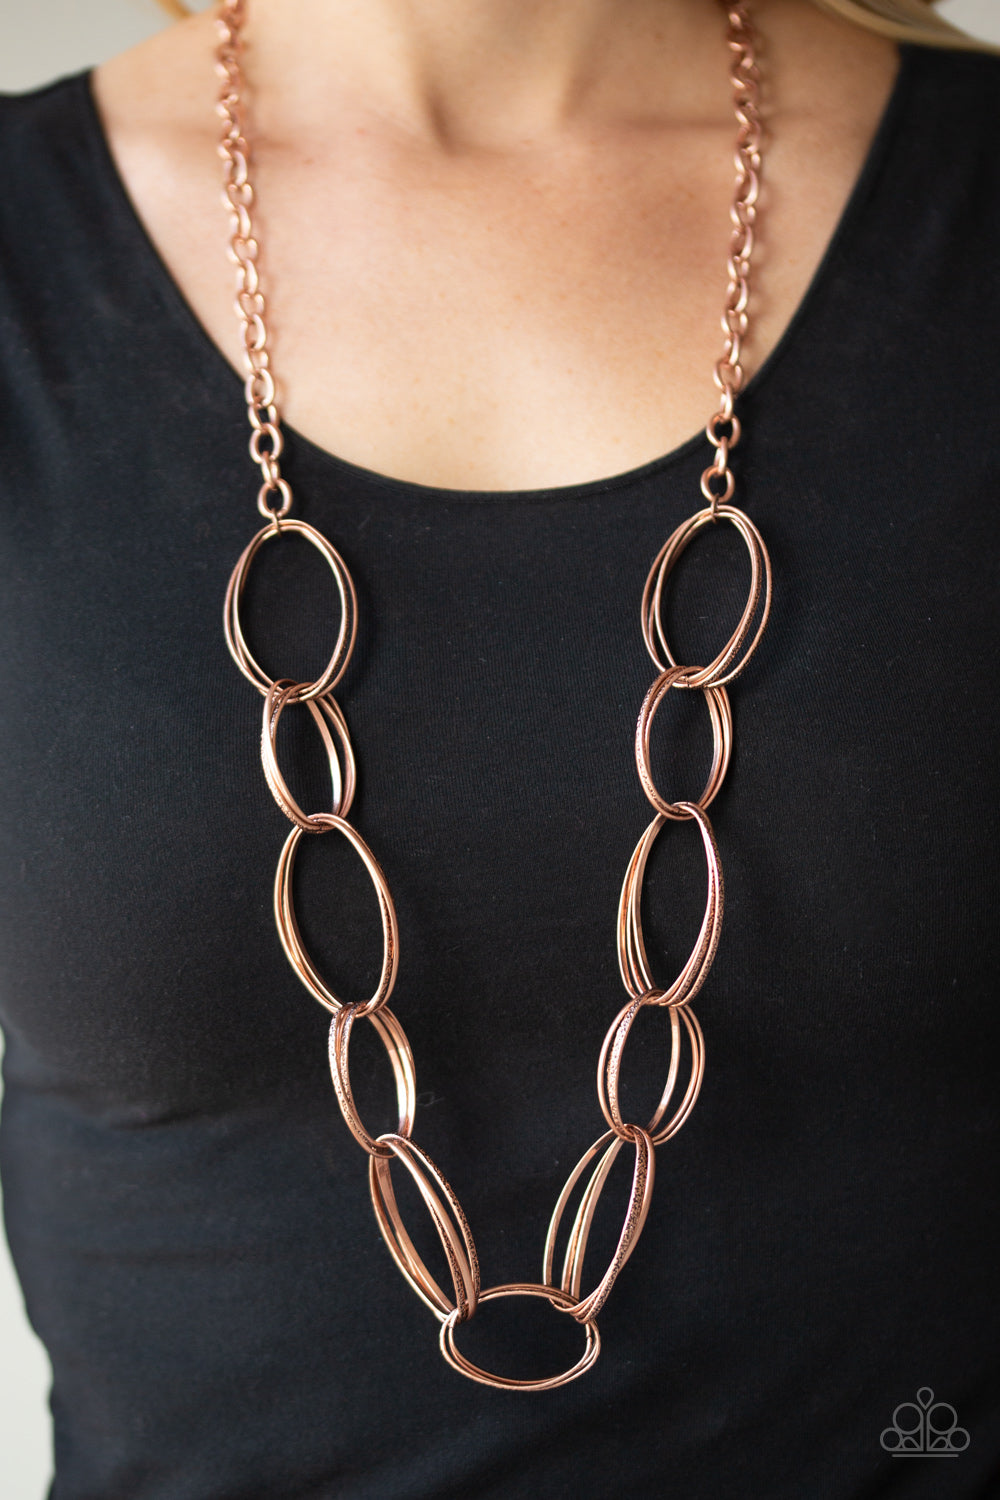 Ring Bling Necklace - Copper